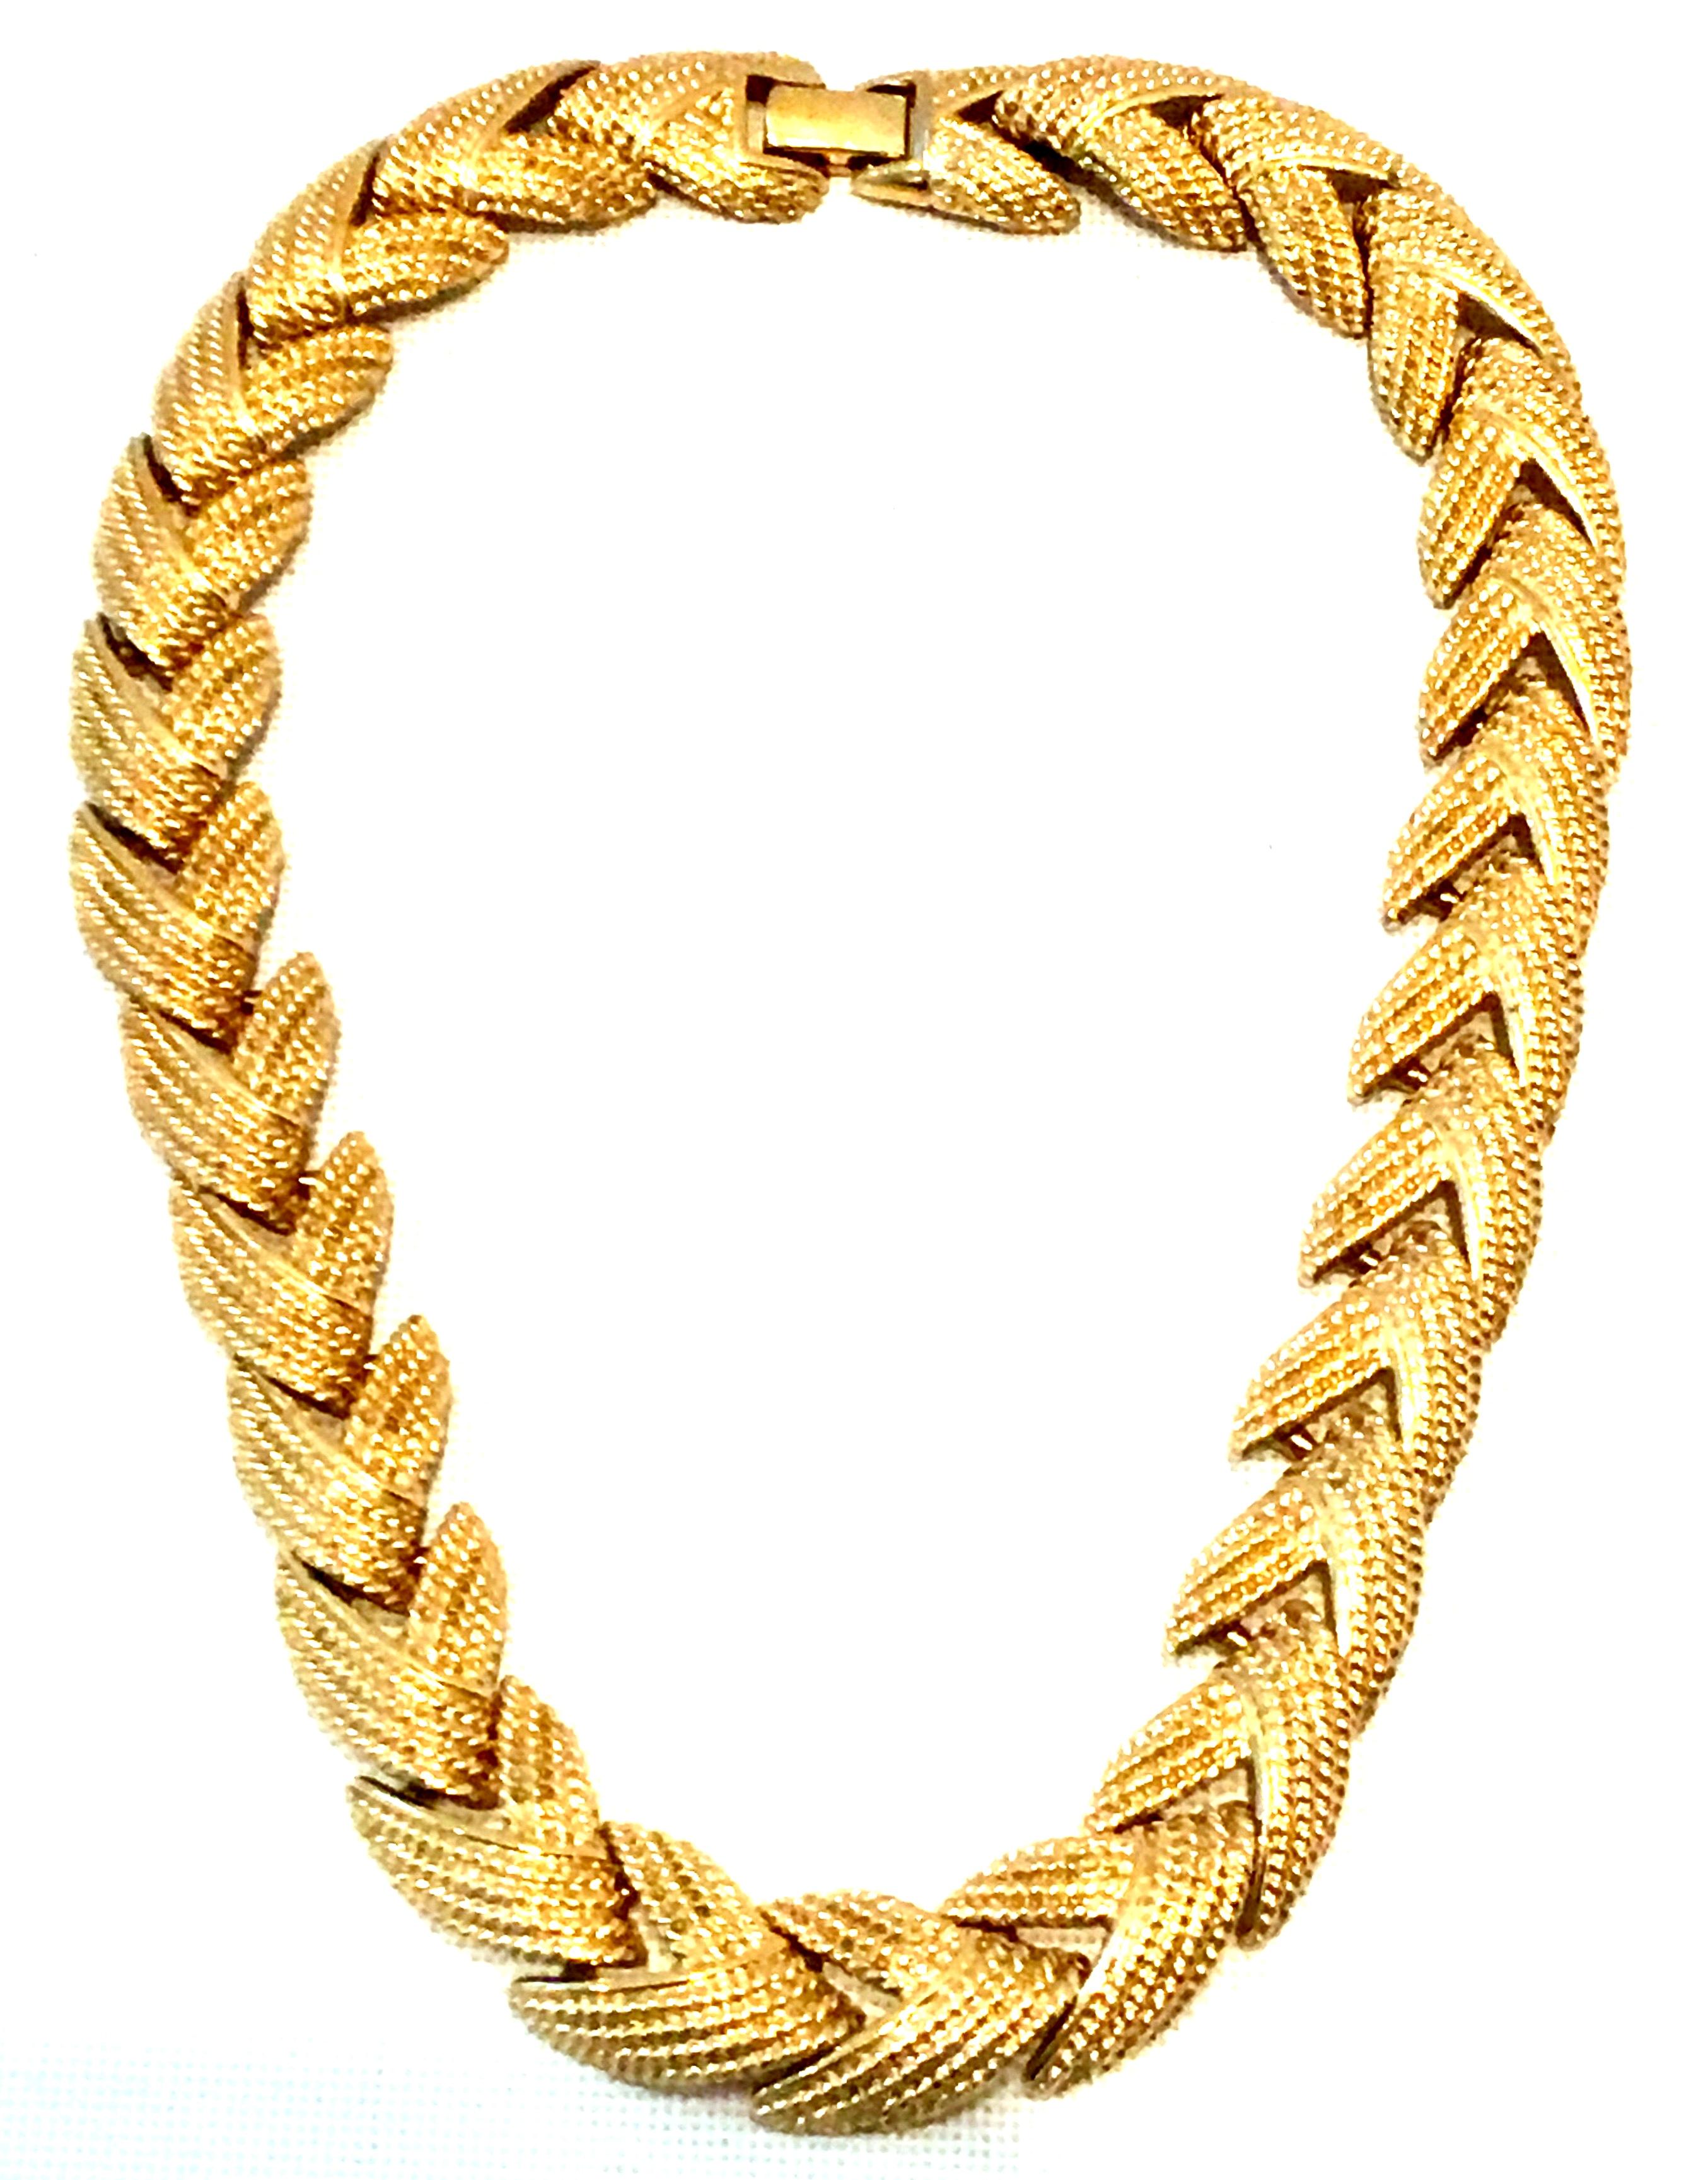 20th Century Gold Plate Choker Style Link Necklace & Bracelet By Napier In Good Condition For Sale In West Palm Beach, FL